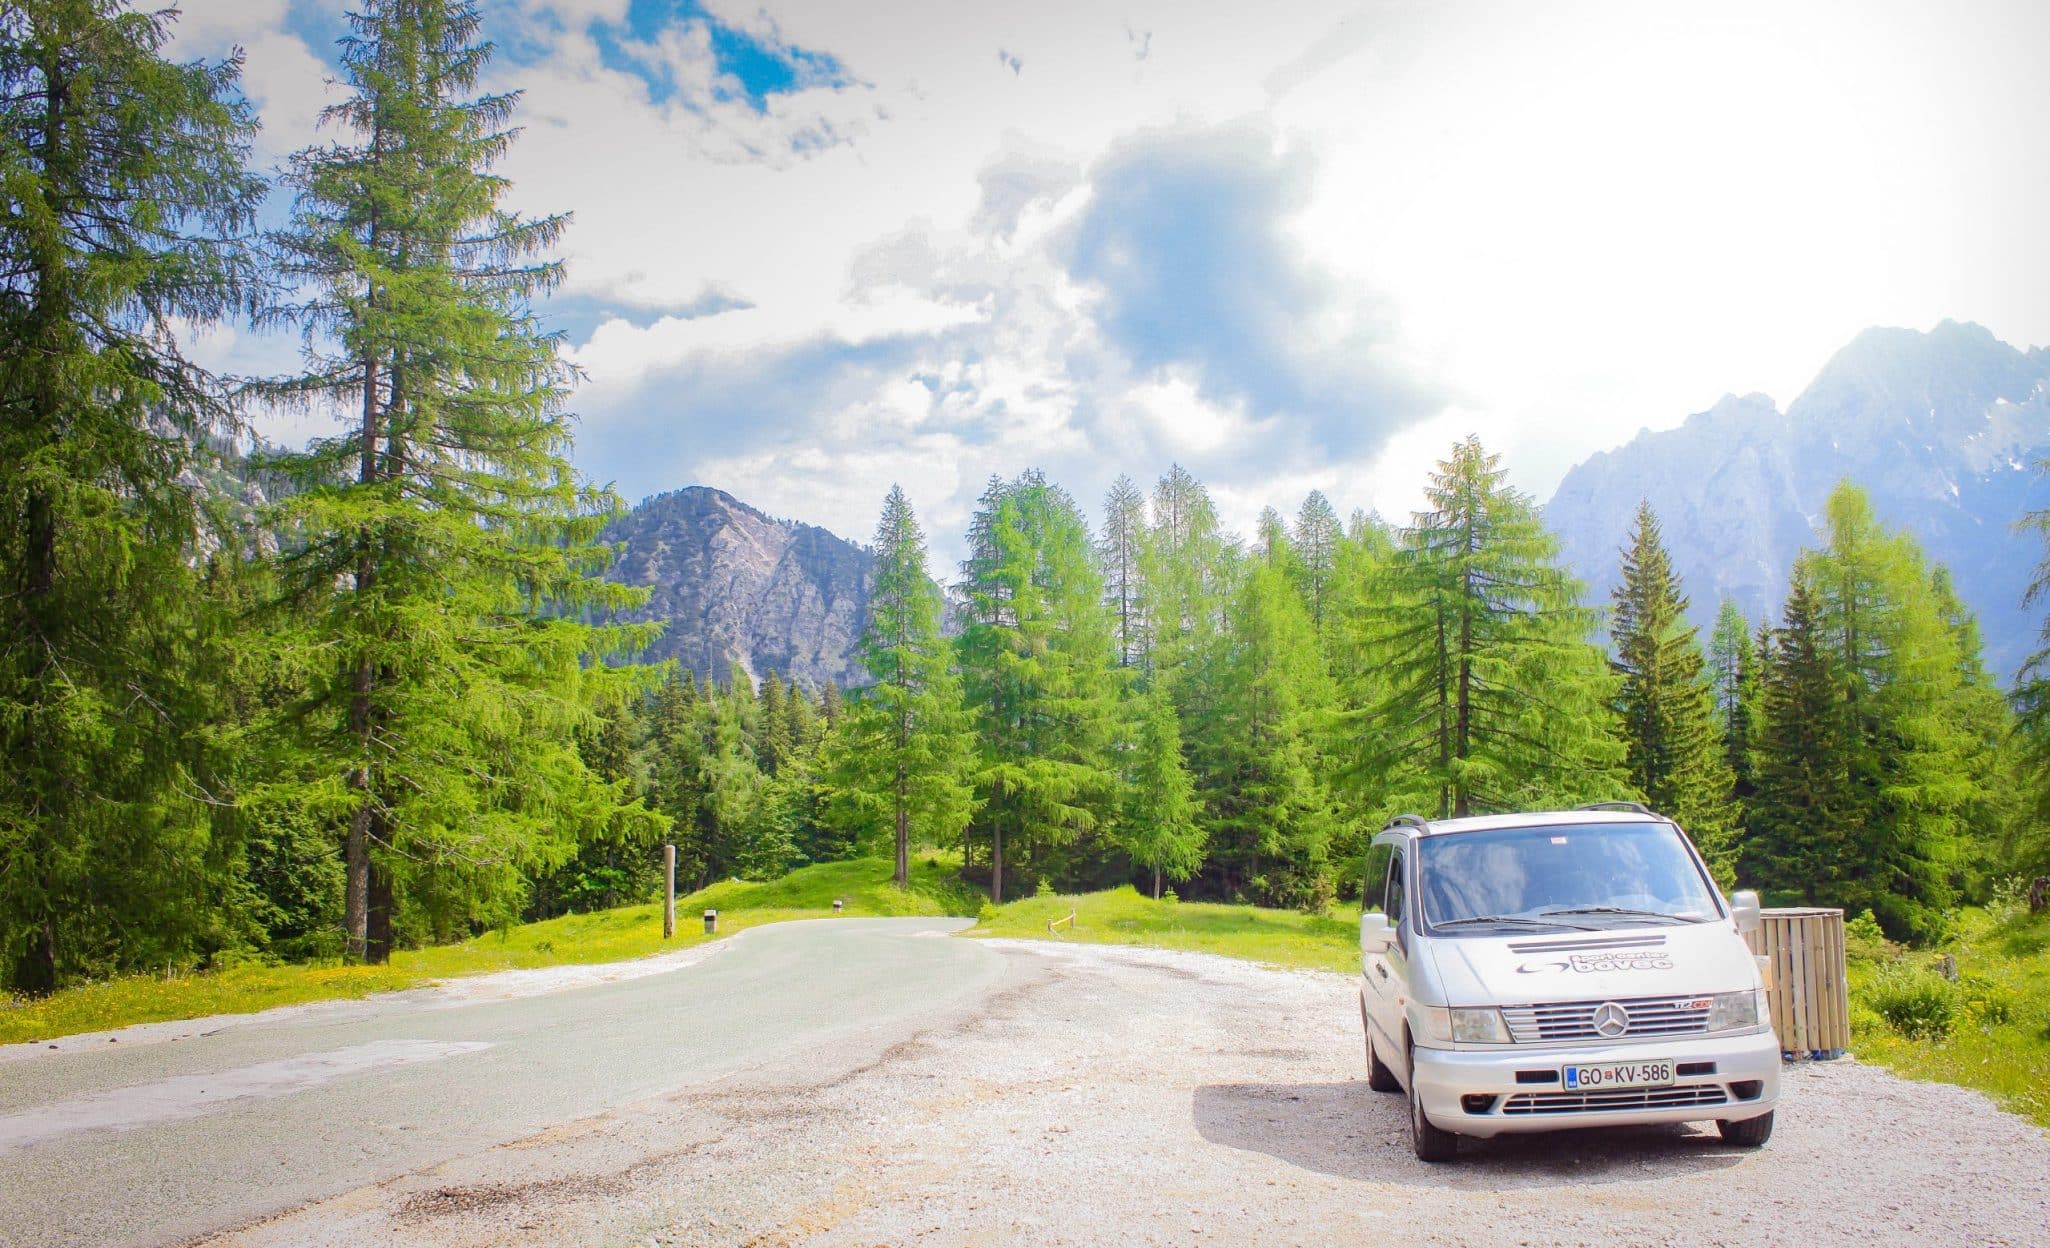 How to find reliable car rental in Ljubljana (+ get a free Slovenia road trip itinerary)